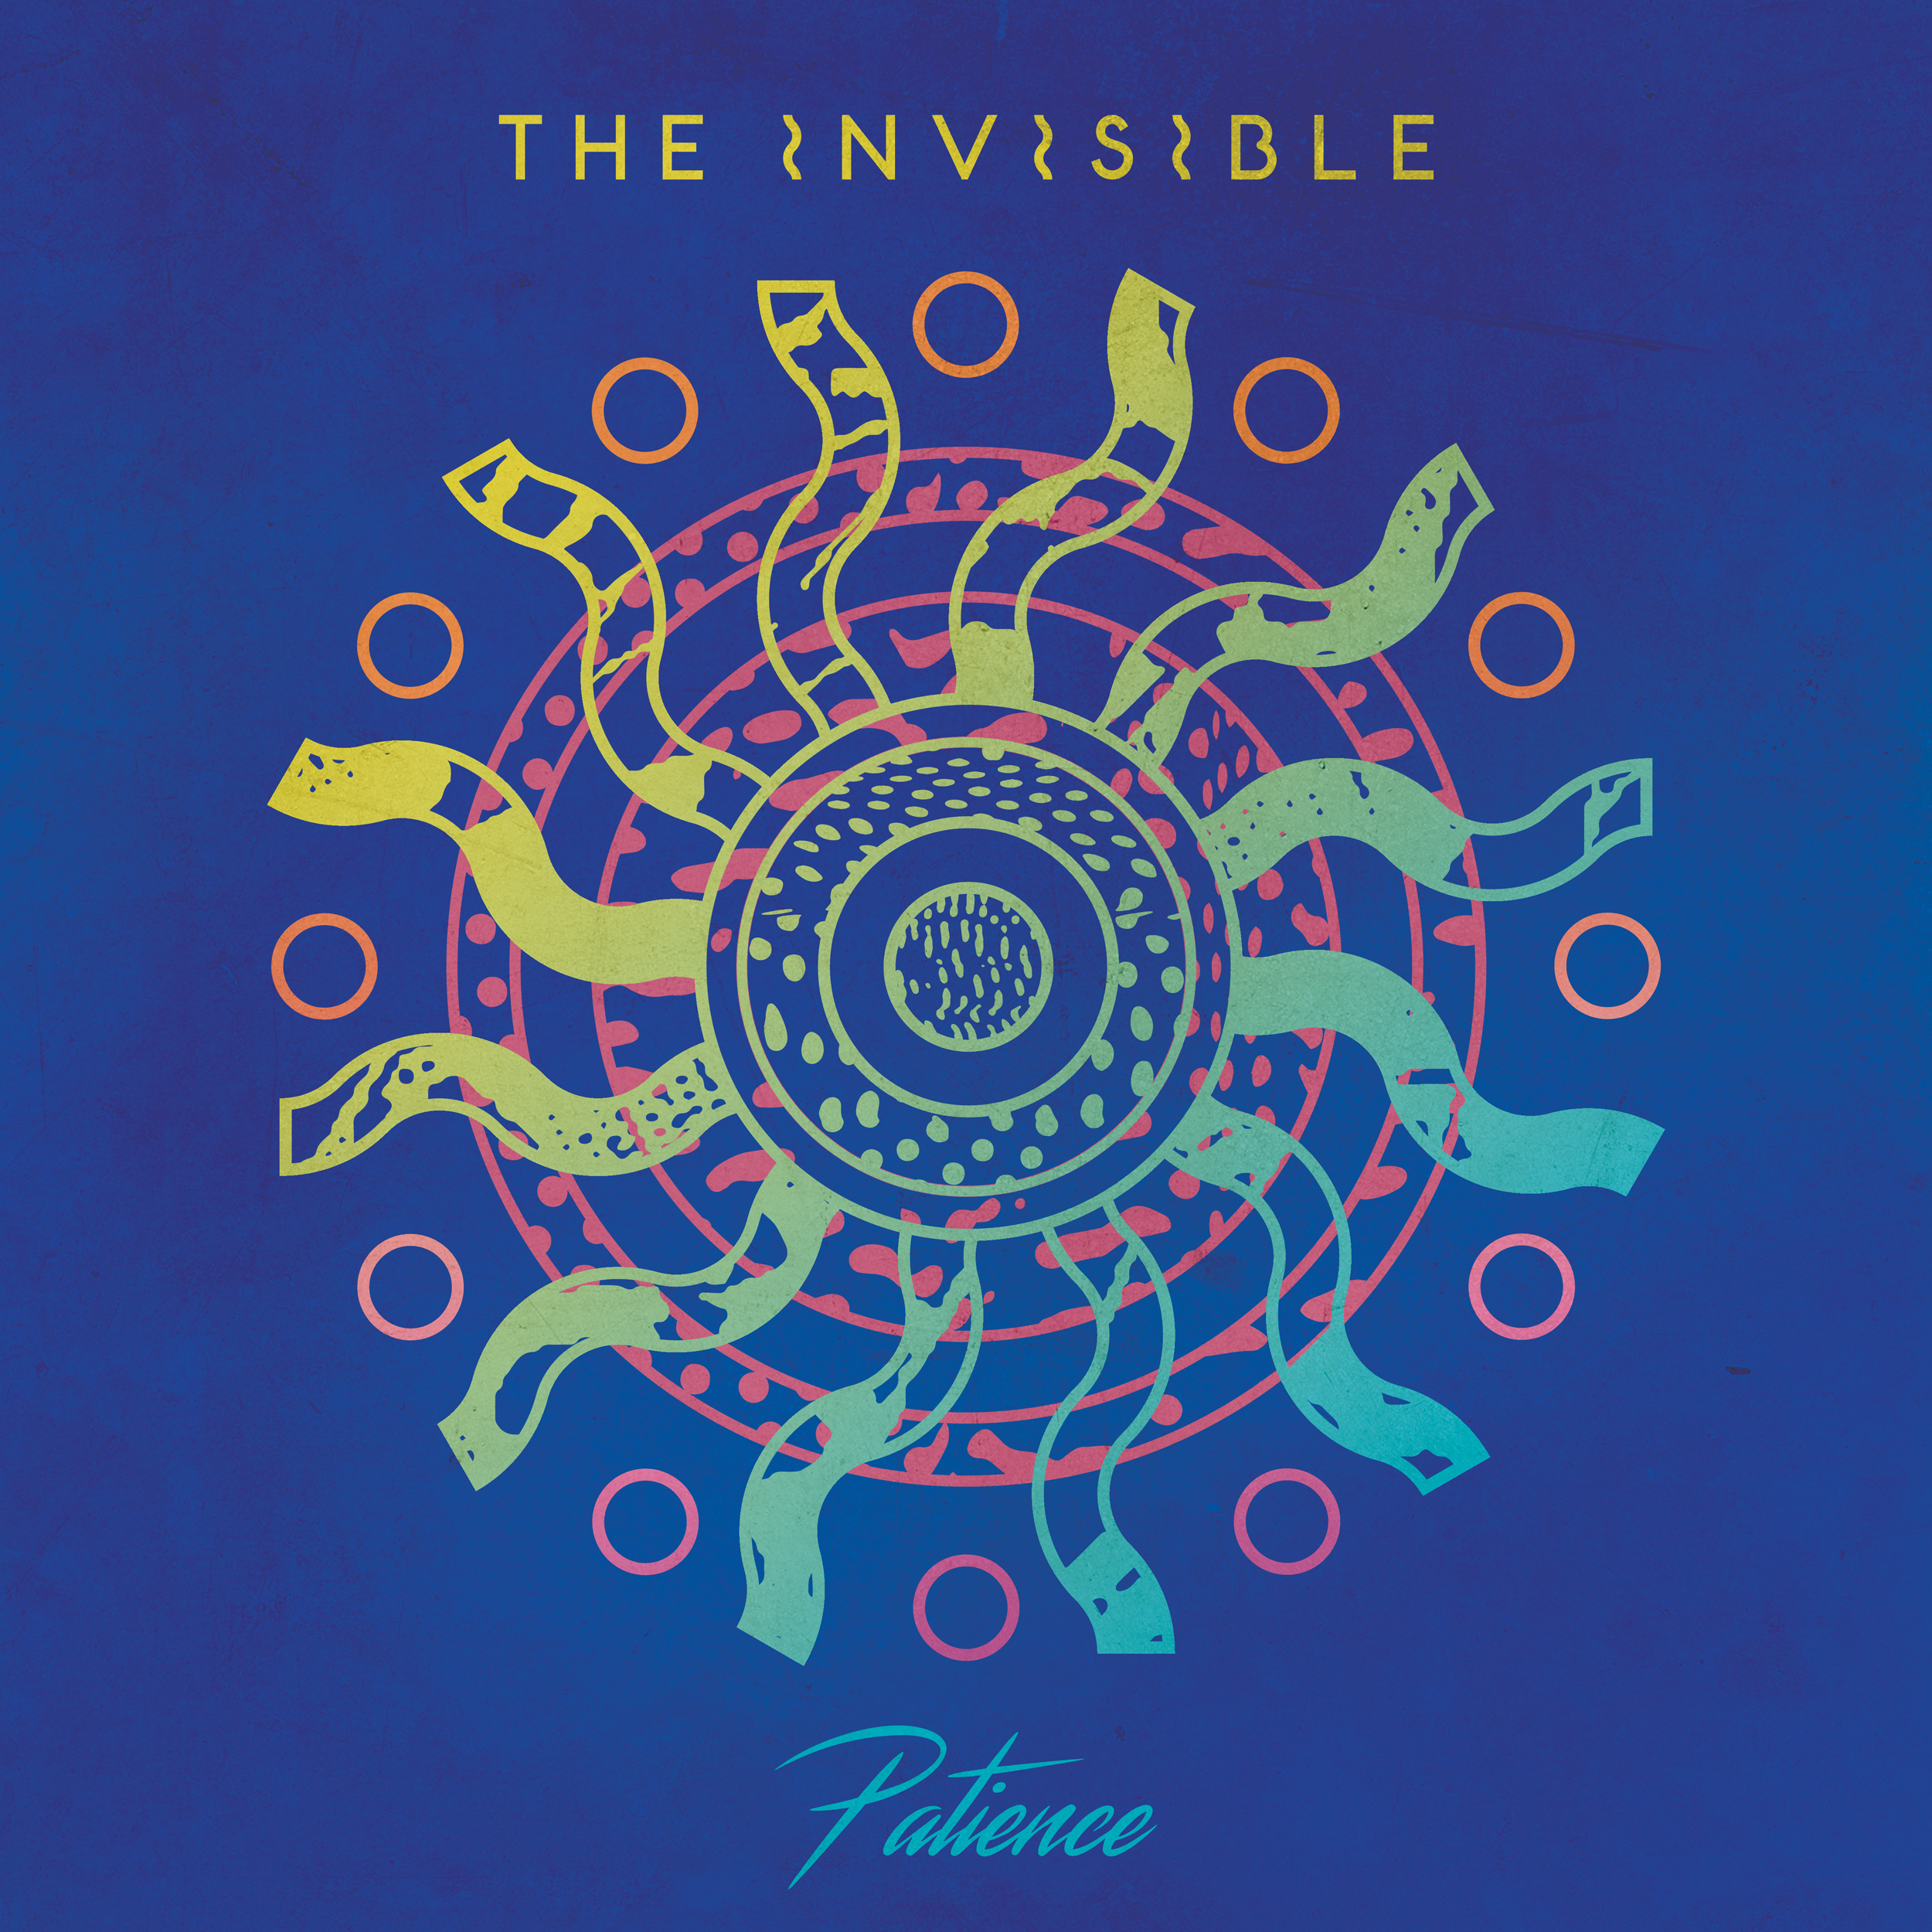 The Invisible - Patience - CD